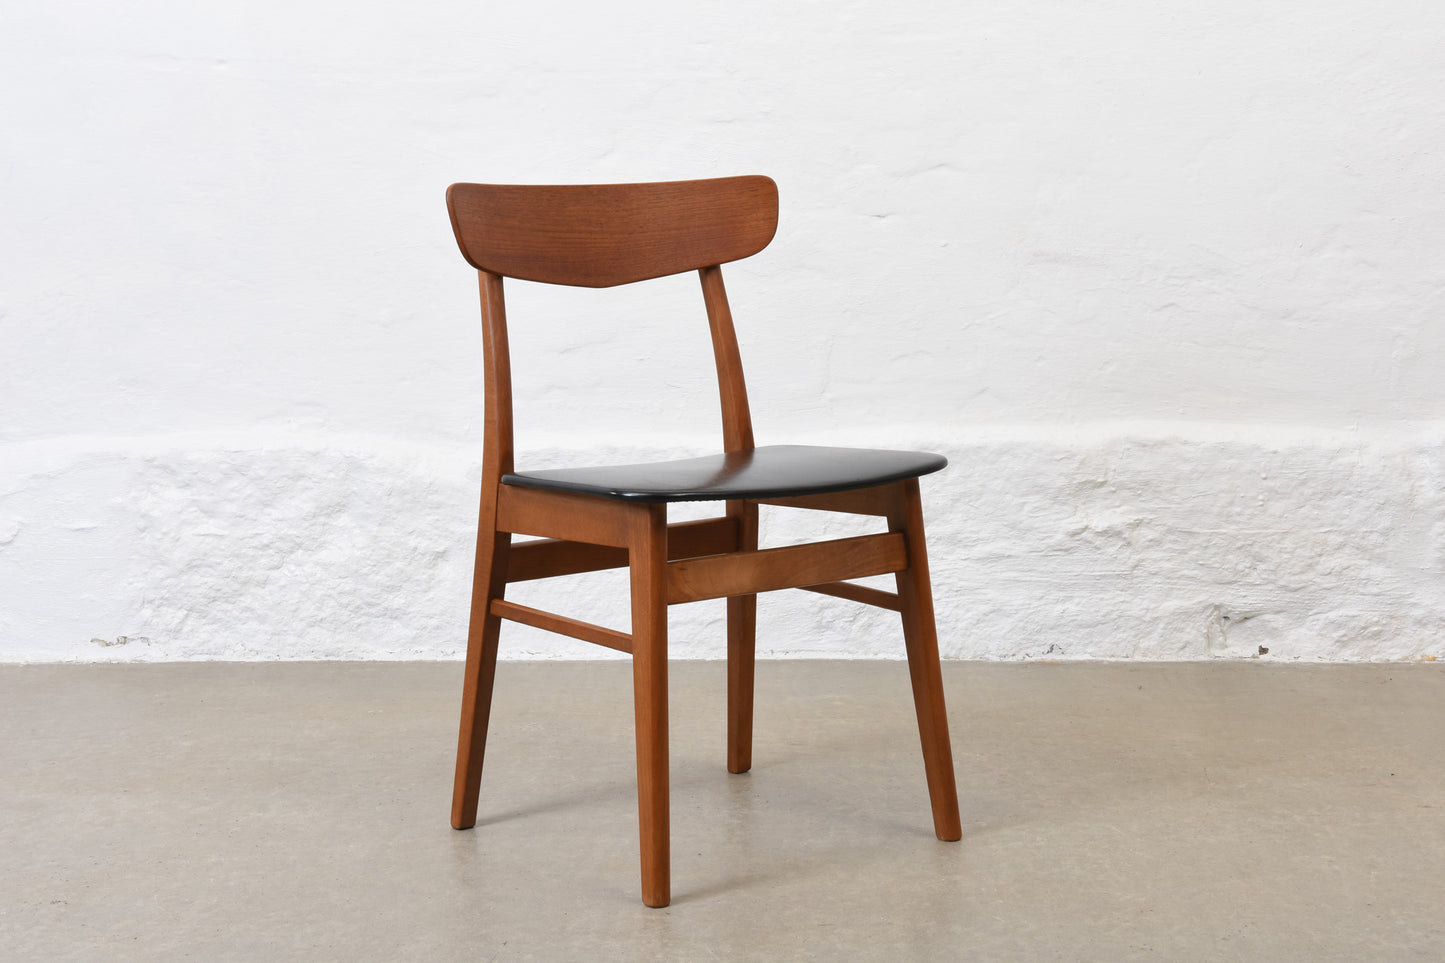 Two available: 1960s teak + beech chairs by Farstrup